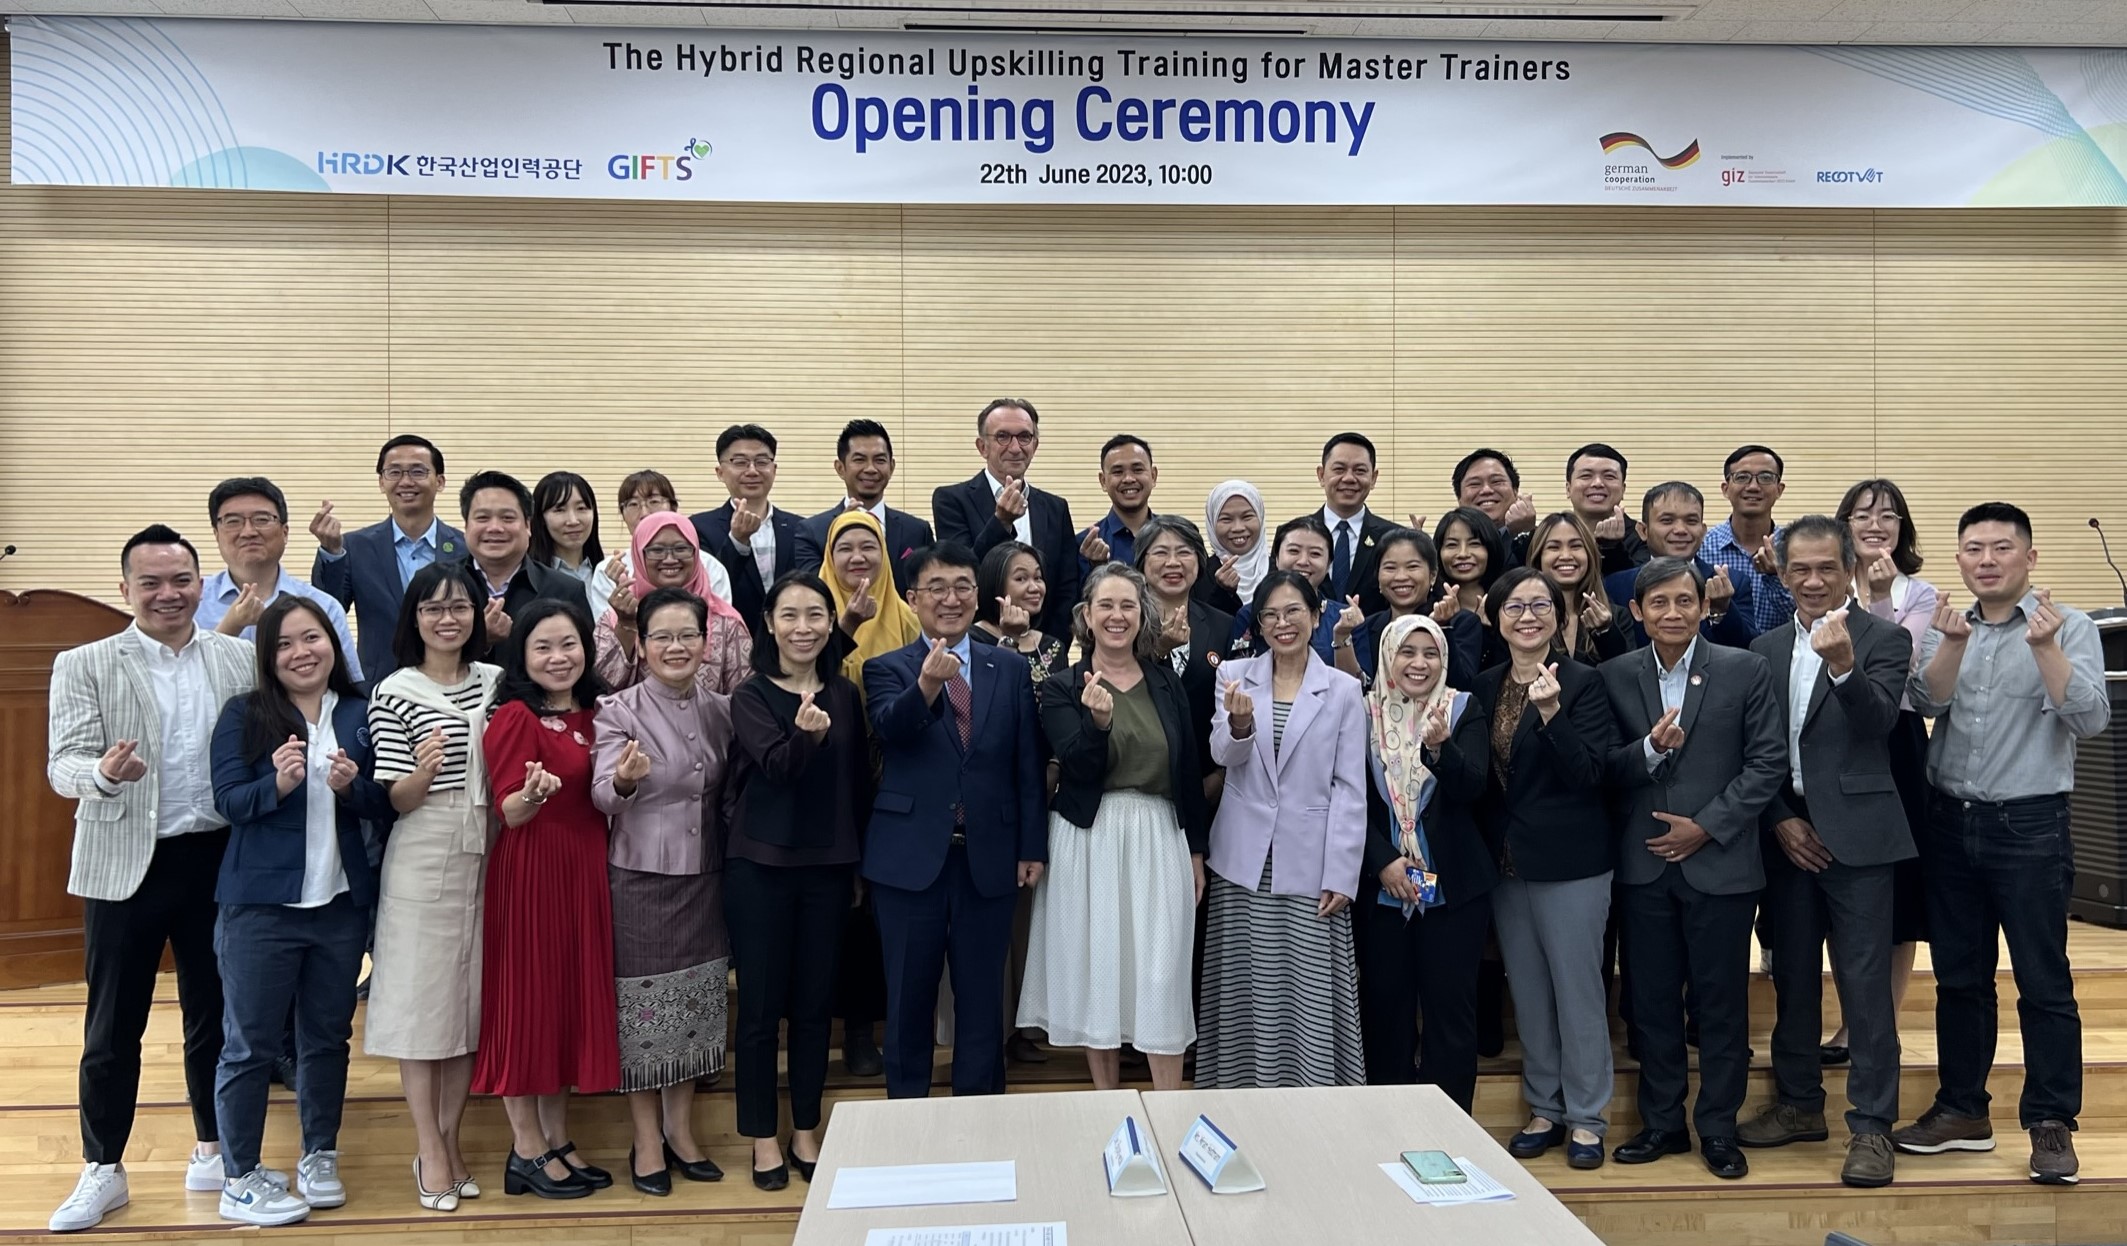 Byung-wook Lee, the Executive Director of HRDK GIFTS, and Miriam Heidtmann, the Programme Director of RECOTVET (centre), warmly welcomed ASEAN trainers attending the on-site Regional Master Trainer Training, which took place from 19th to 30th June 2023, in Incheon, Republic of Korea.